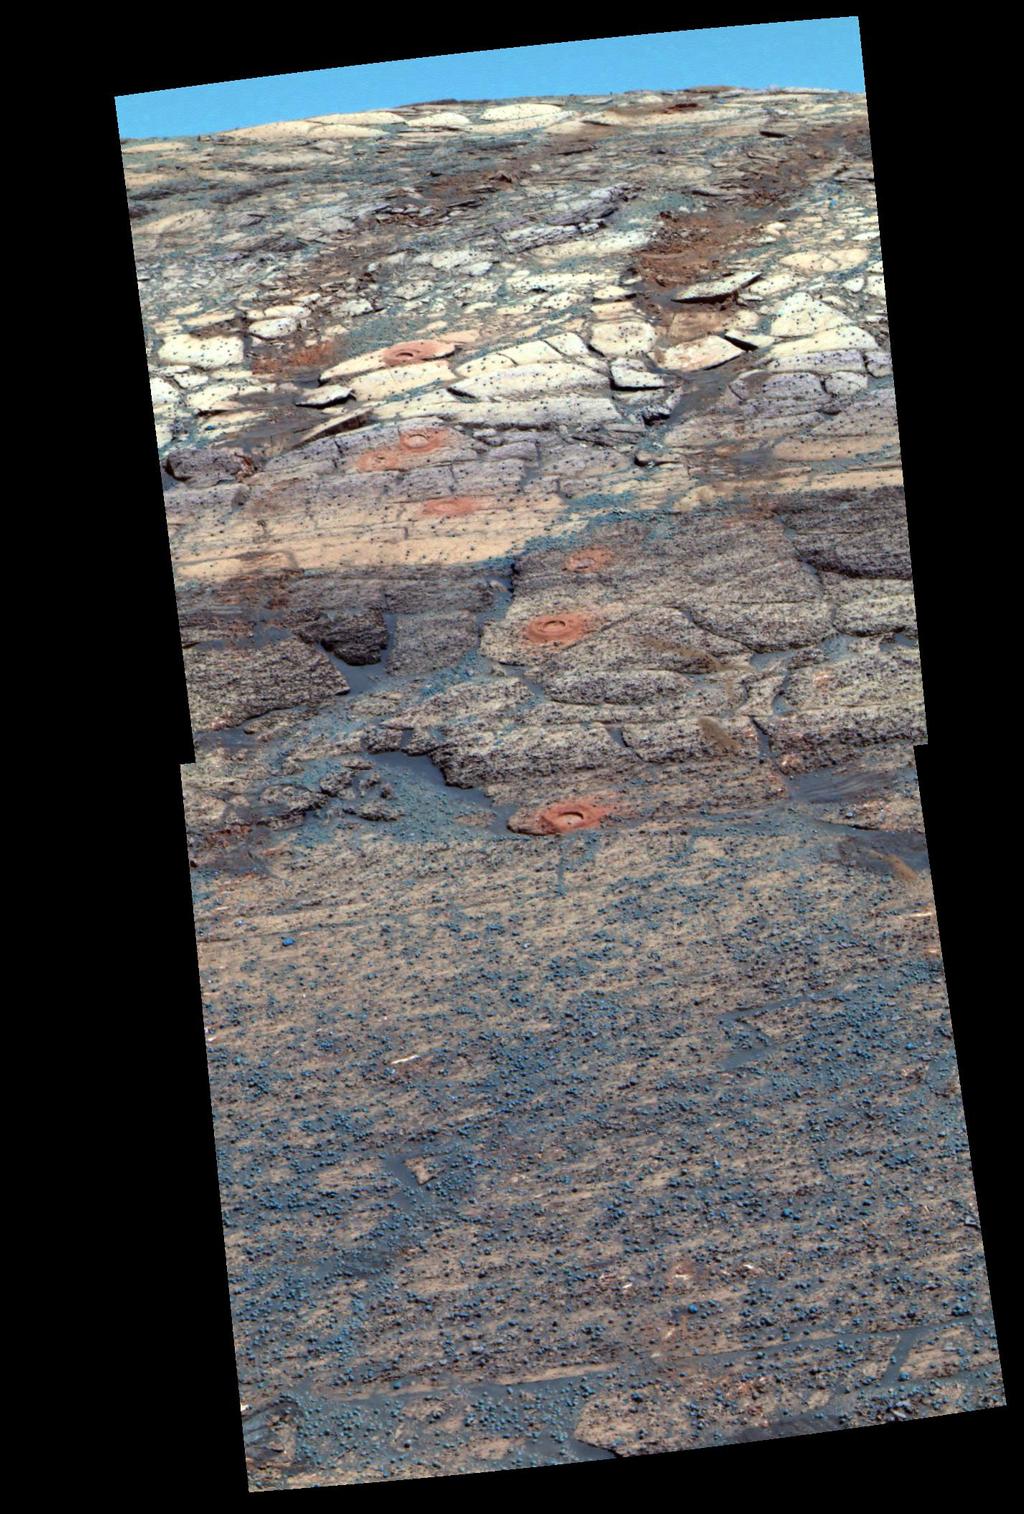 This view from the Mars Exploration Rover Opportunity's panoramic camera is a false-color composite rendering of the first seven holes that the rover's rock abrasion tool dug on the inner slope of "Endurance Crater."